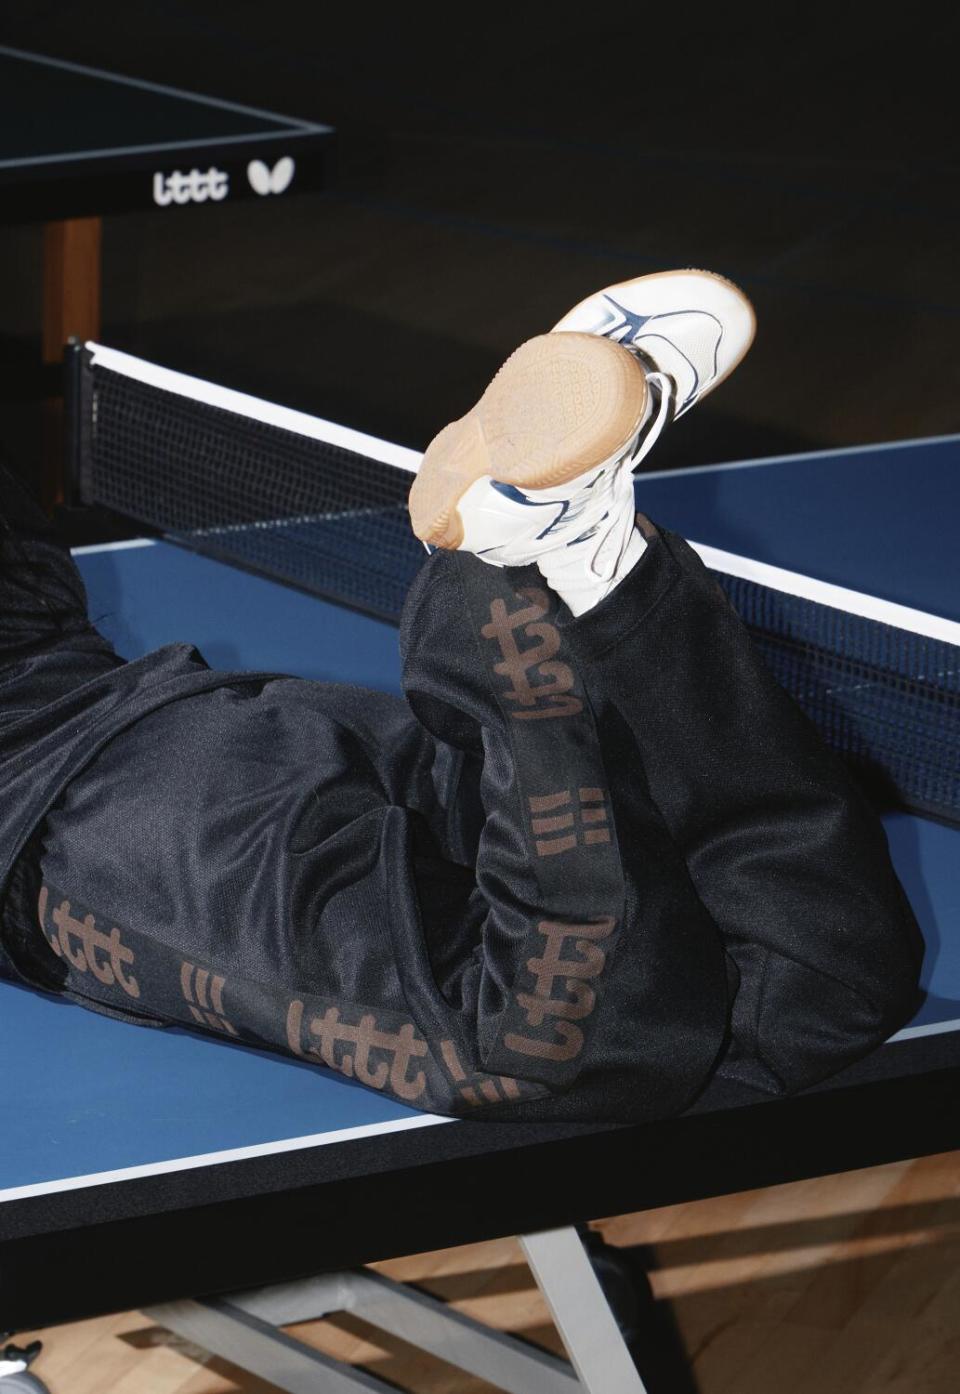 LTTT tracksuit in black and Butterfly table tennis shoes.